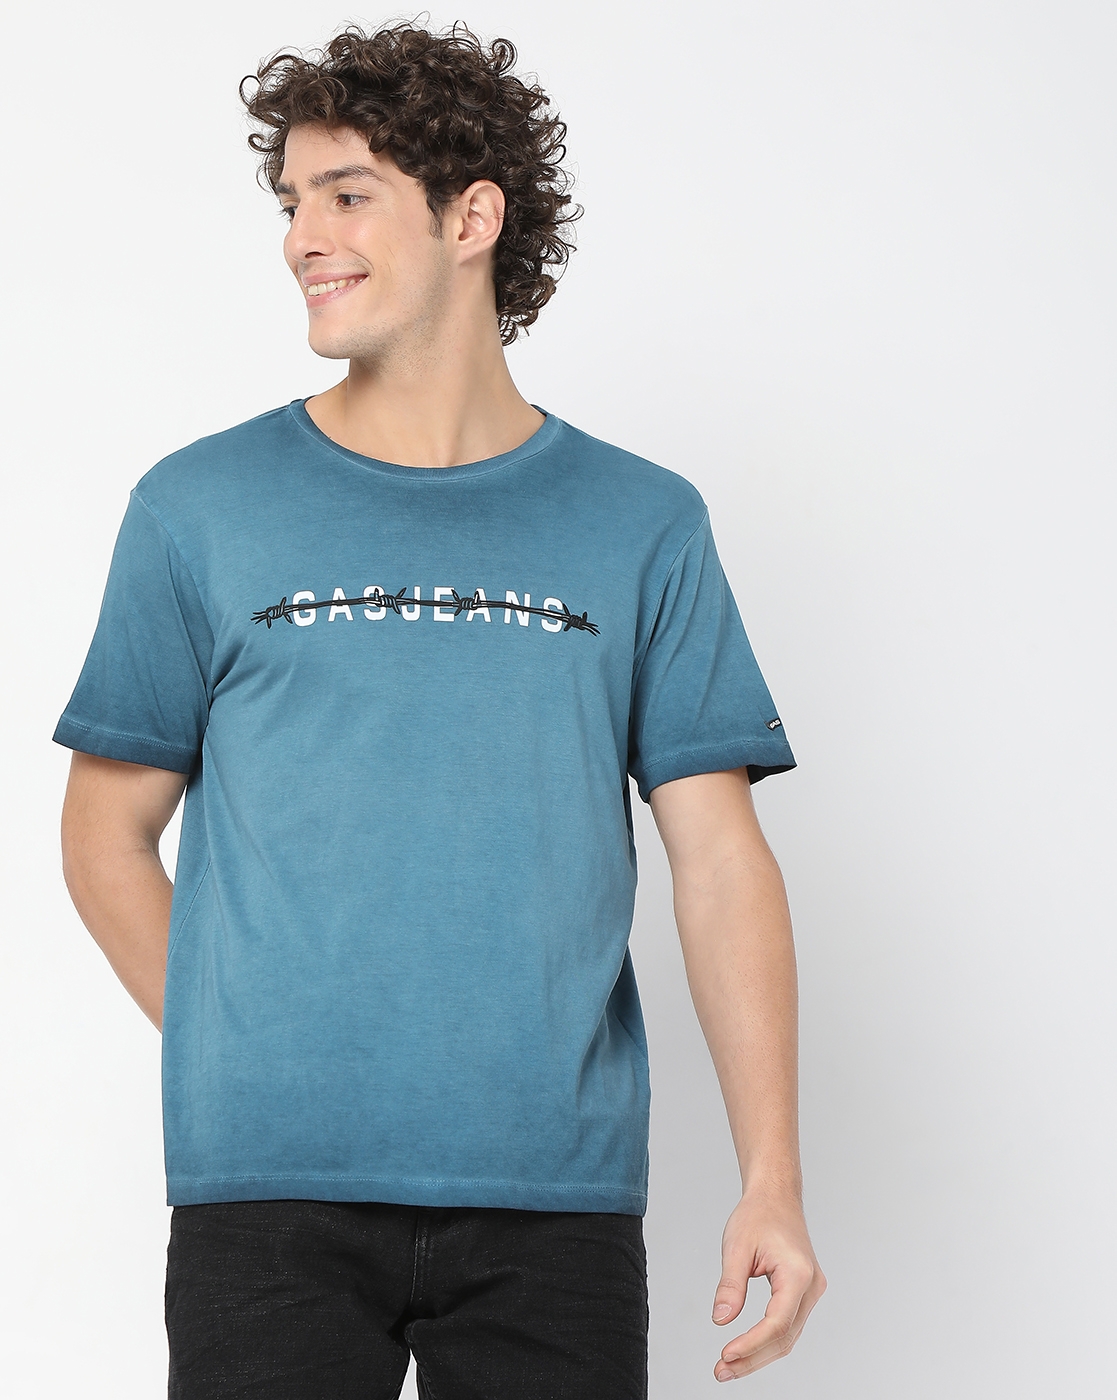 Scuba Wired Relaxed Fit Crew-Neck T-Shirt